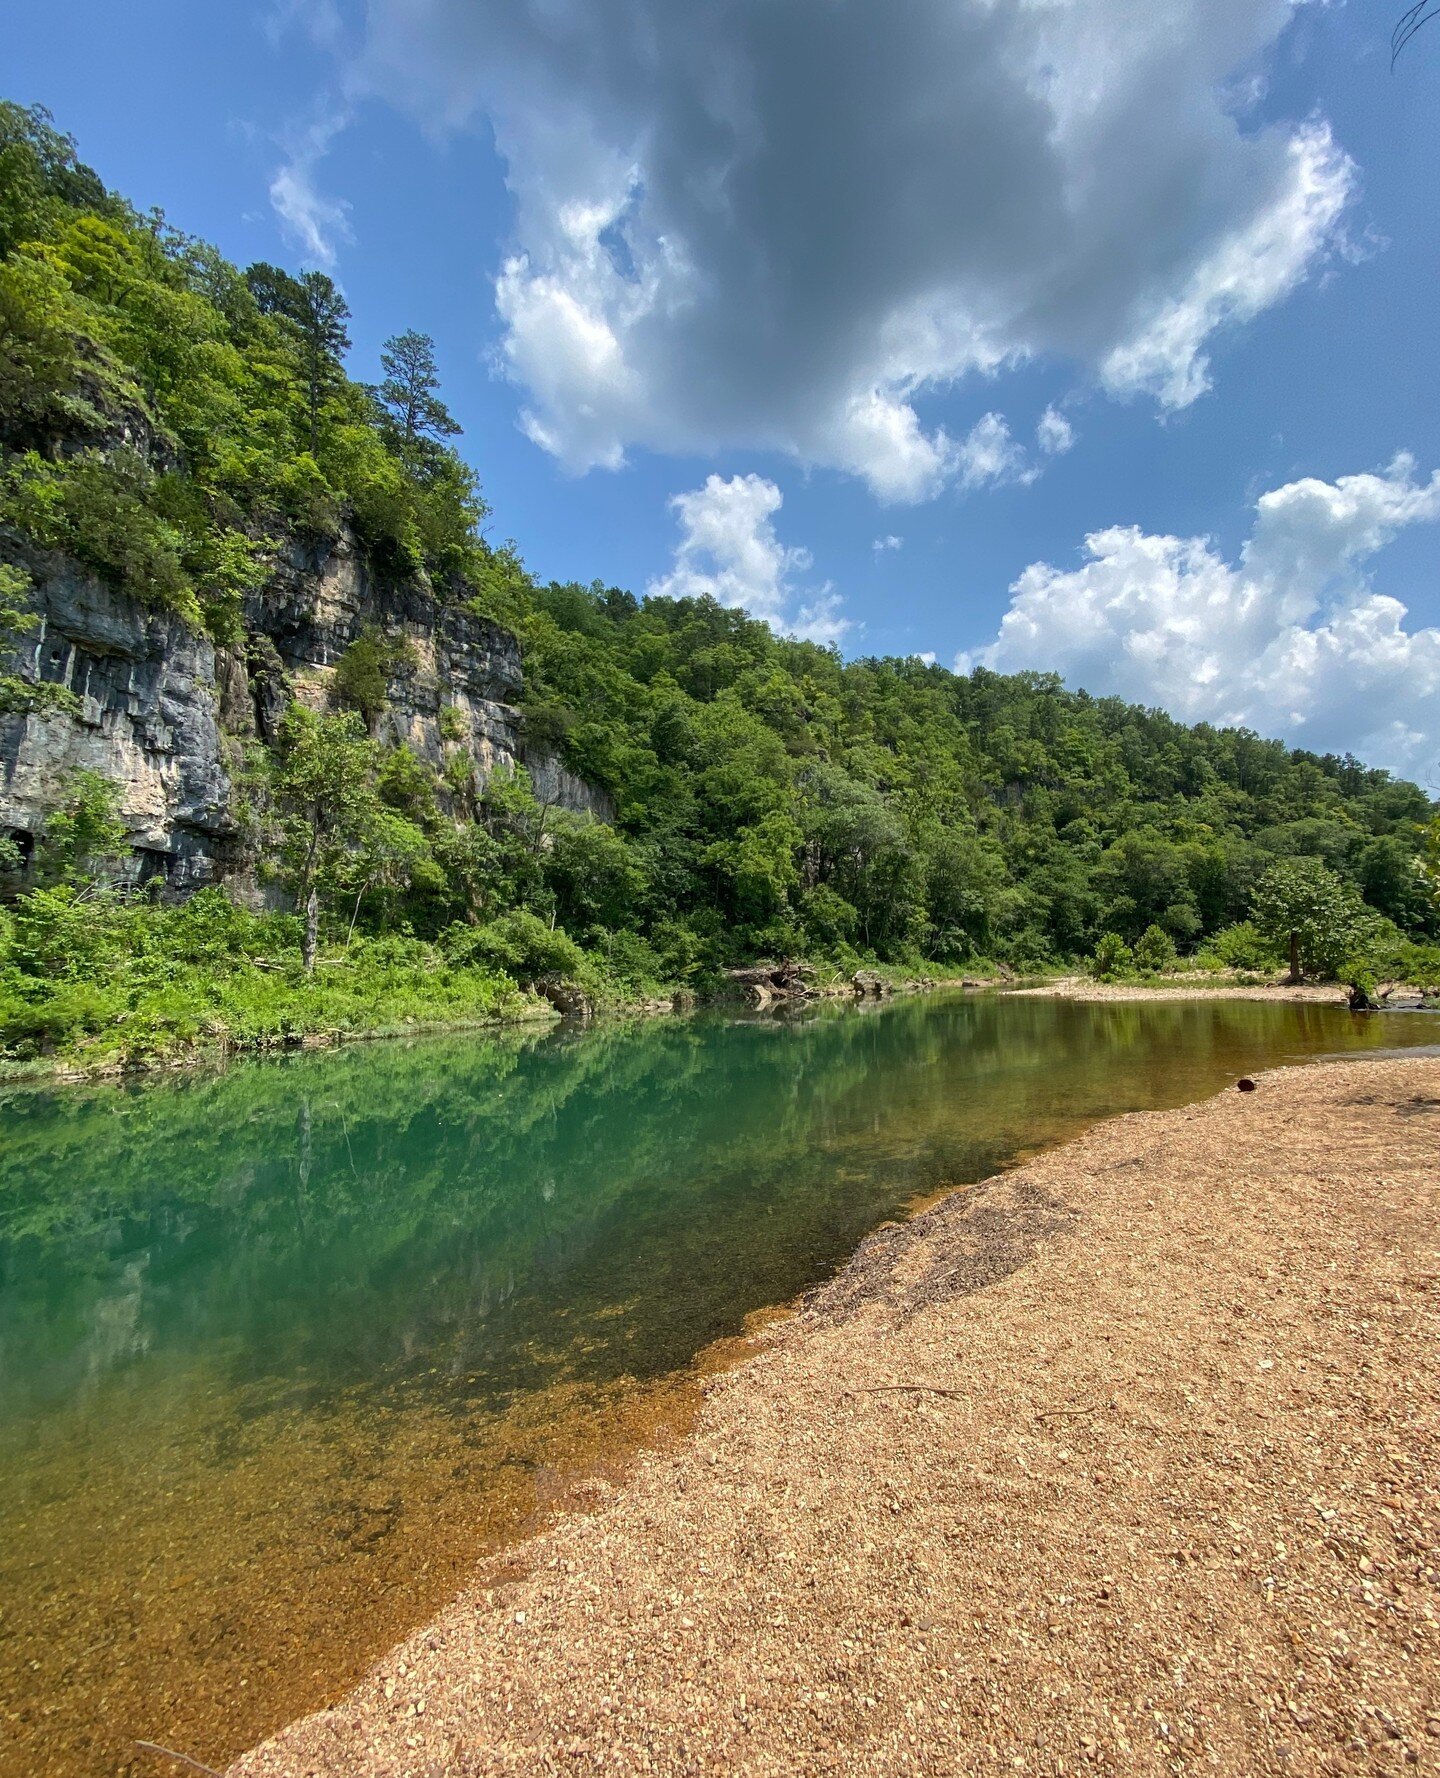 This past weekend we enjoyed two celebrations important to us at Missouri Confluence Waterkeeper: National Public Lands Day and World Rivers Day.⁠
⁠
The perfect place to celebrate these two days together is in the Missouri Ozarks. The Eleven Point, C